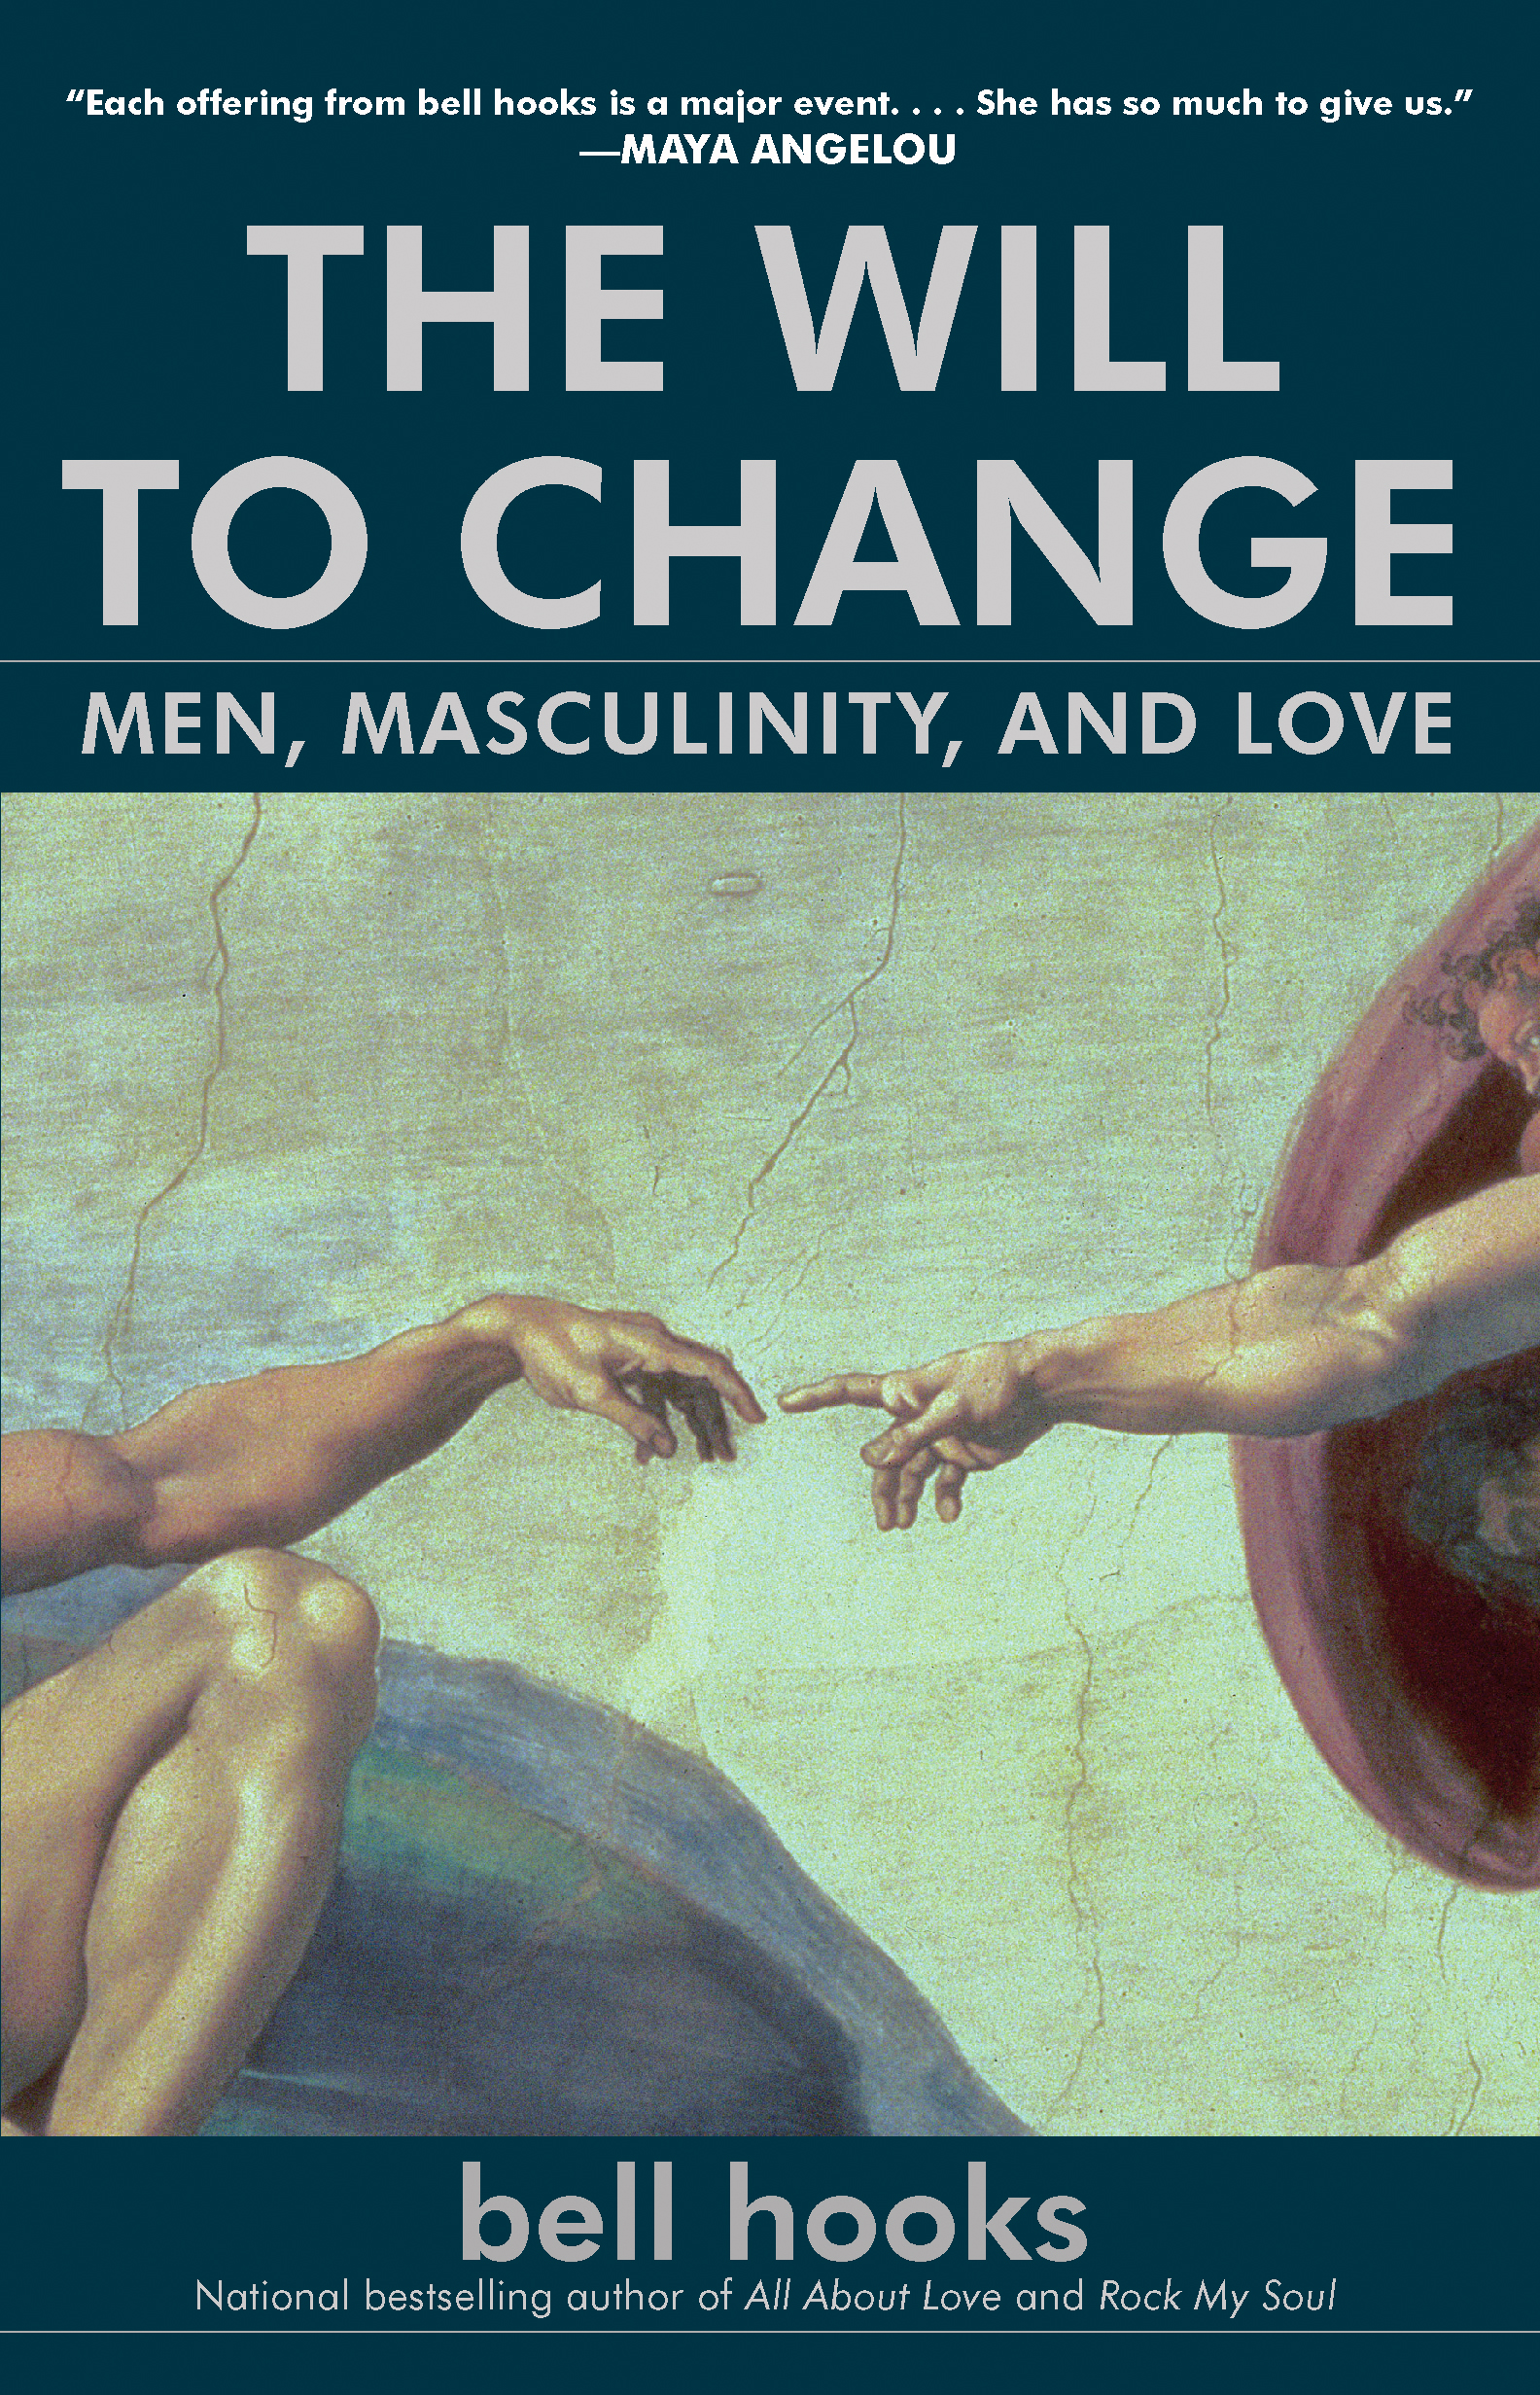 bell hooks: The Will to Change: Men, Masculinity, and Love (2003)